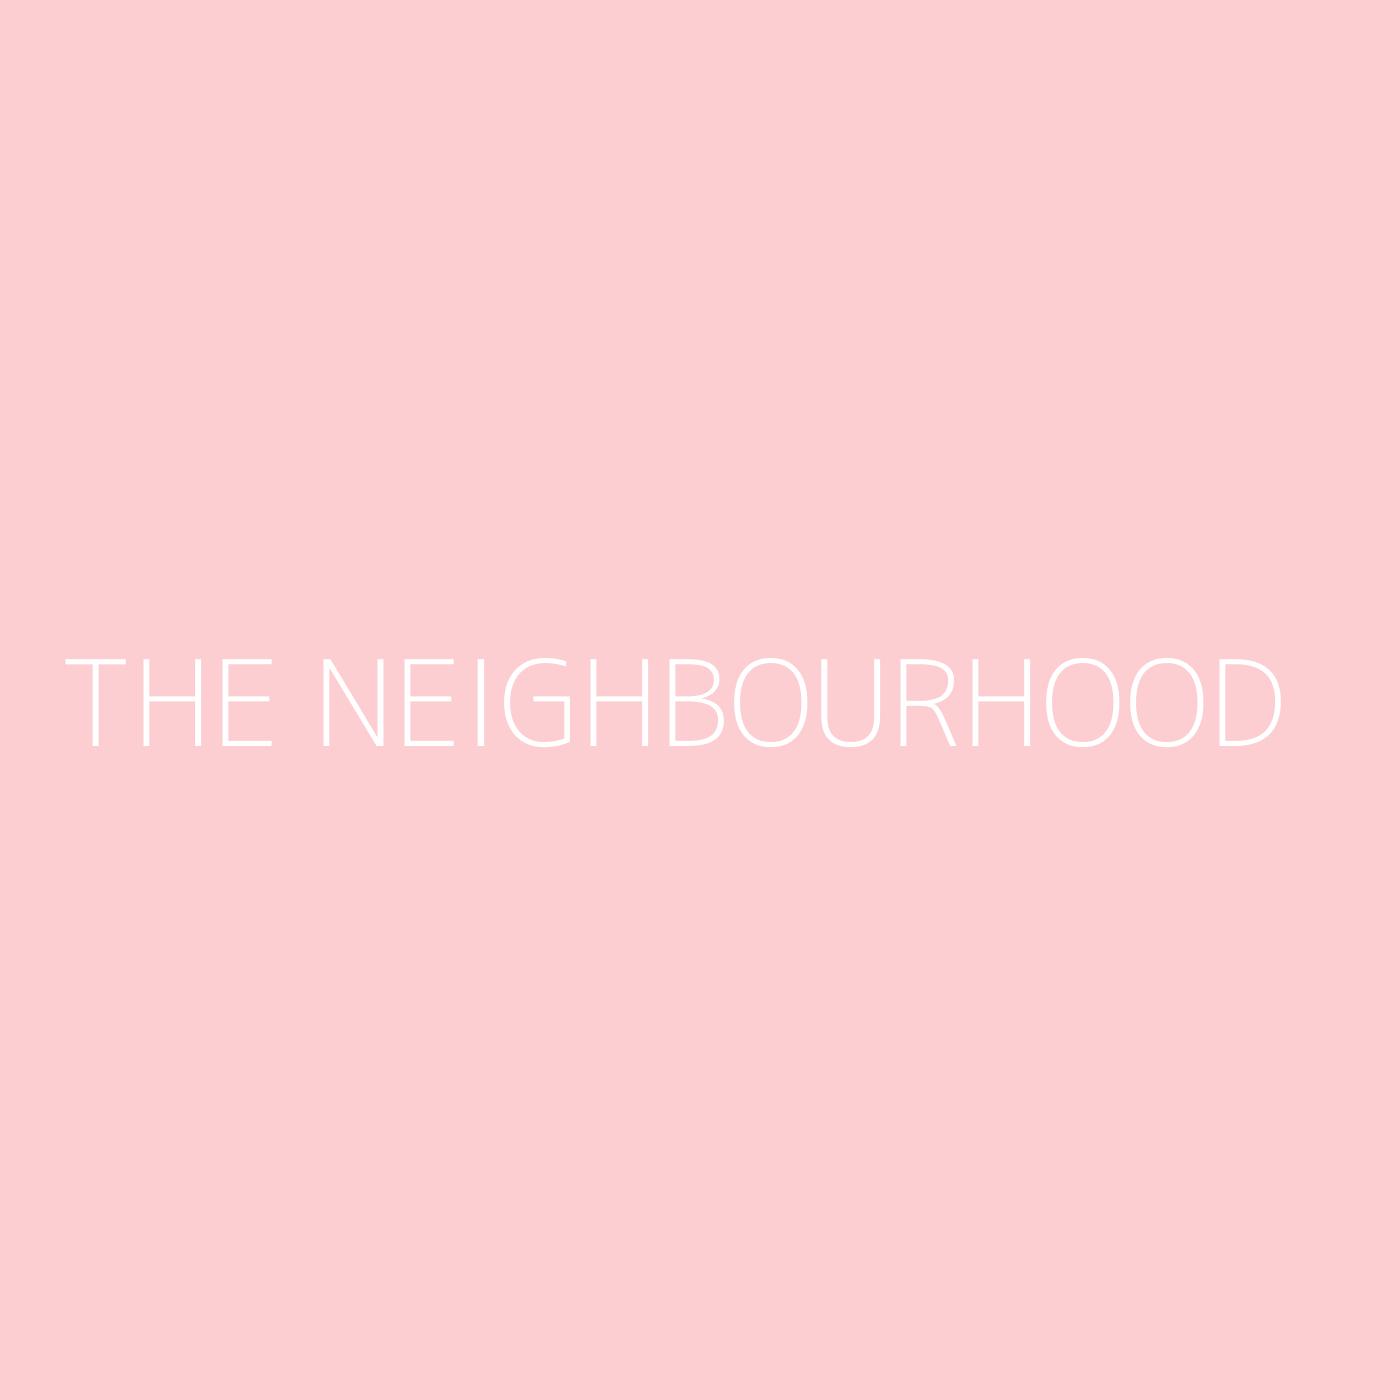 This Is The Neighbourhood - playlist by Spotify